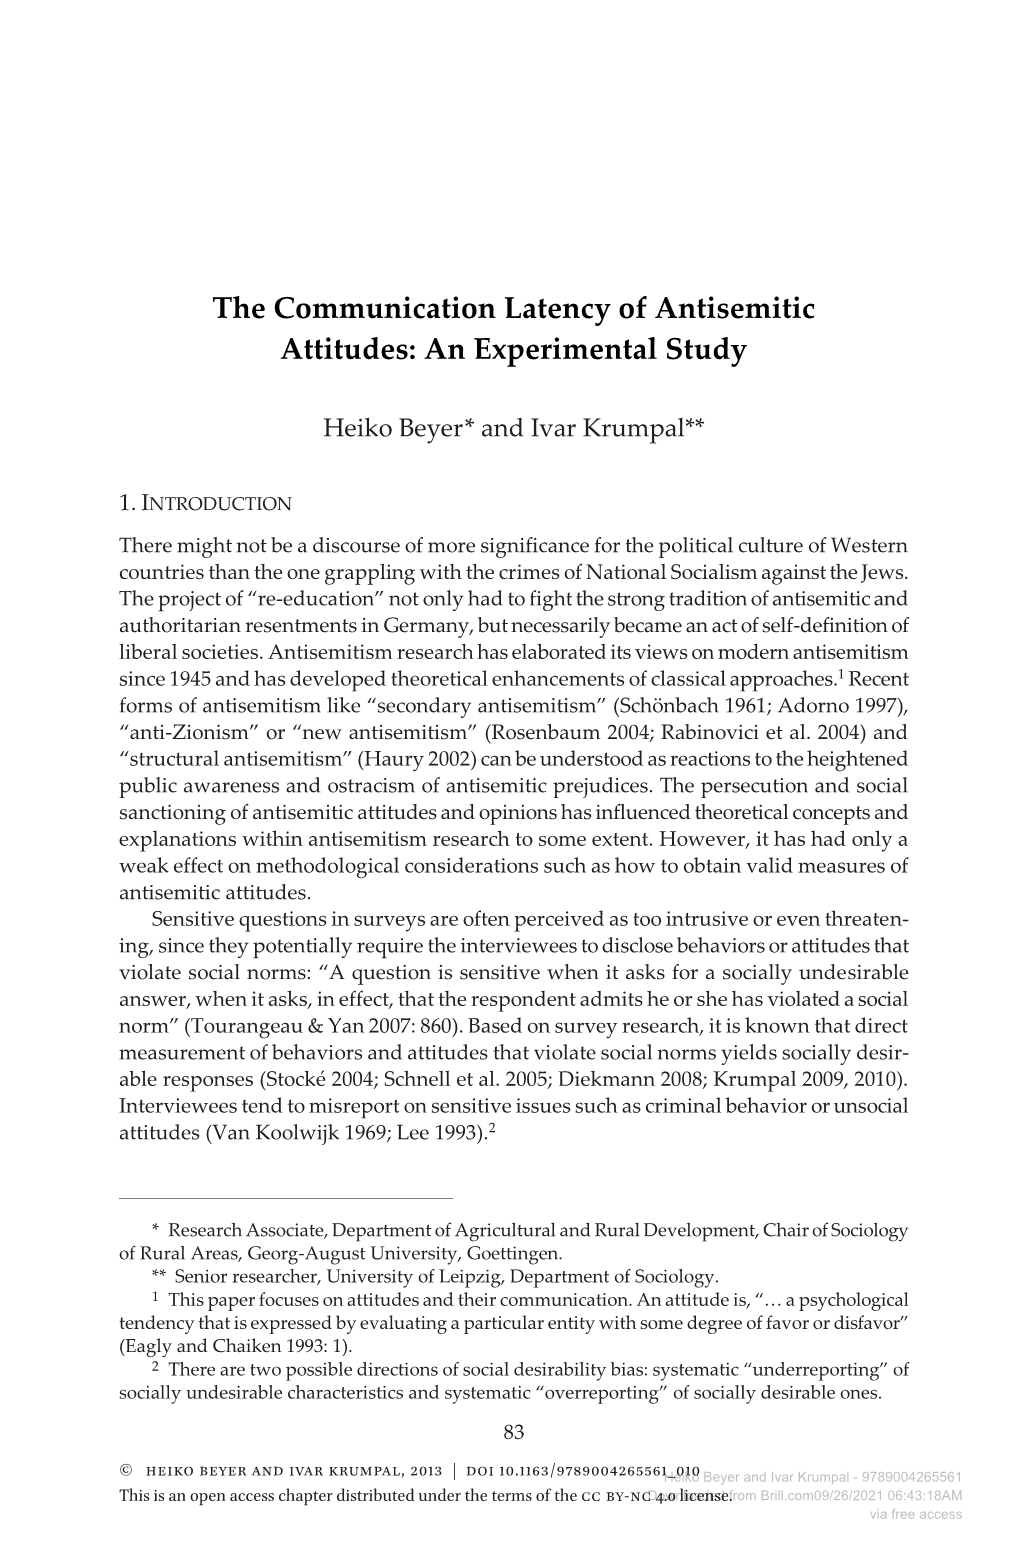 The Communication Latency of Antisemitic Attitudes: an Experimental Study